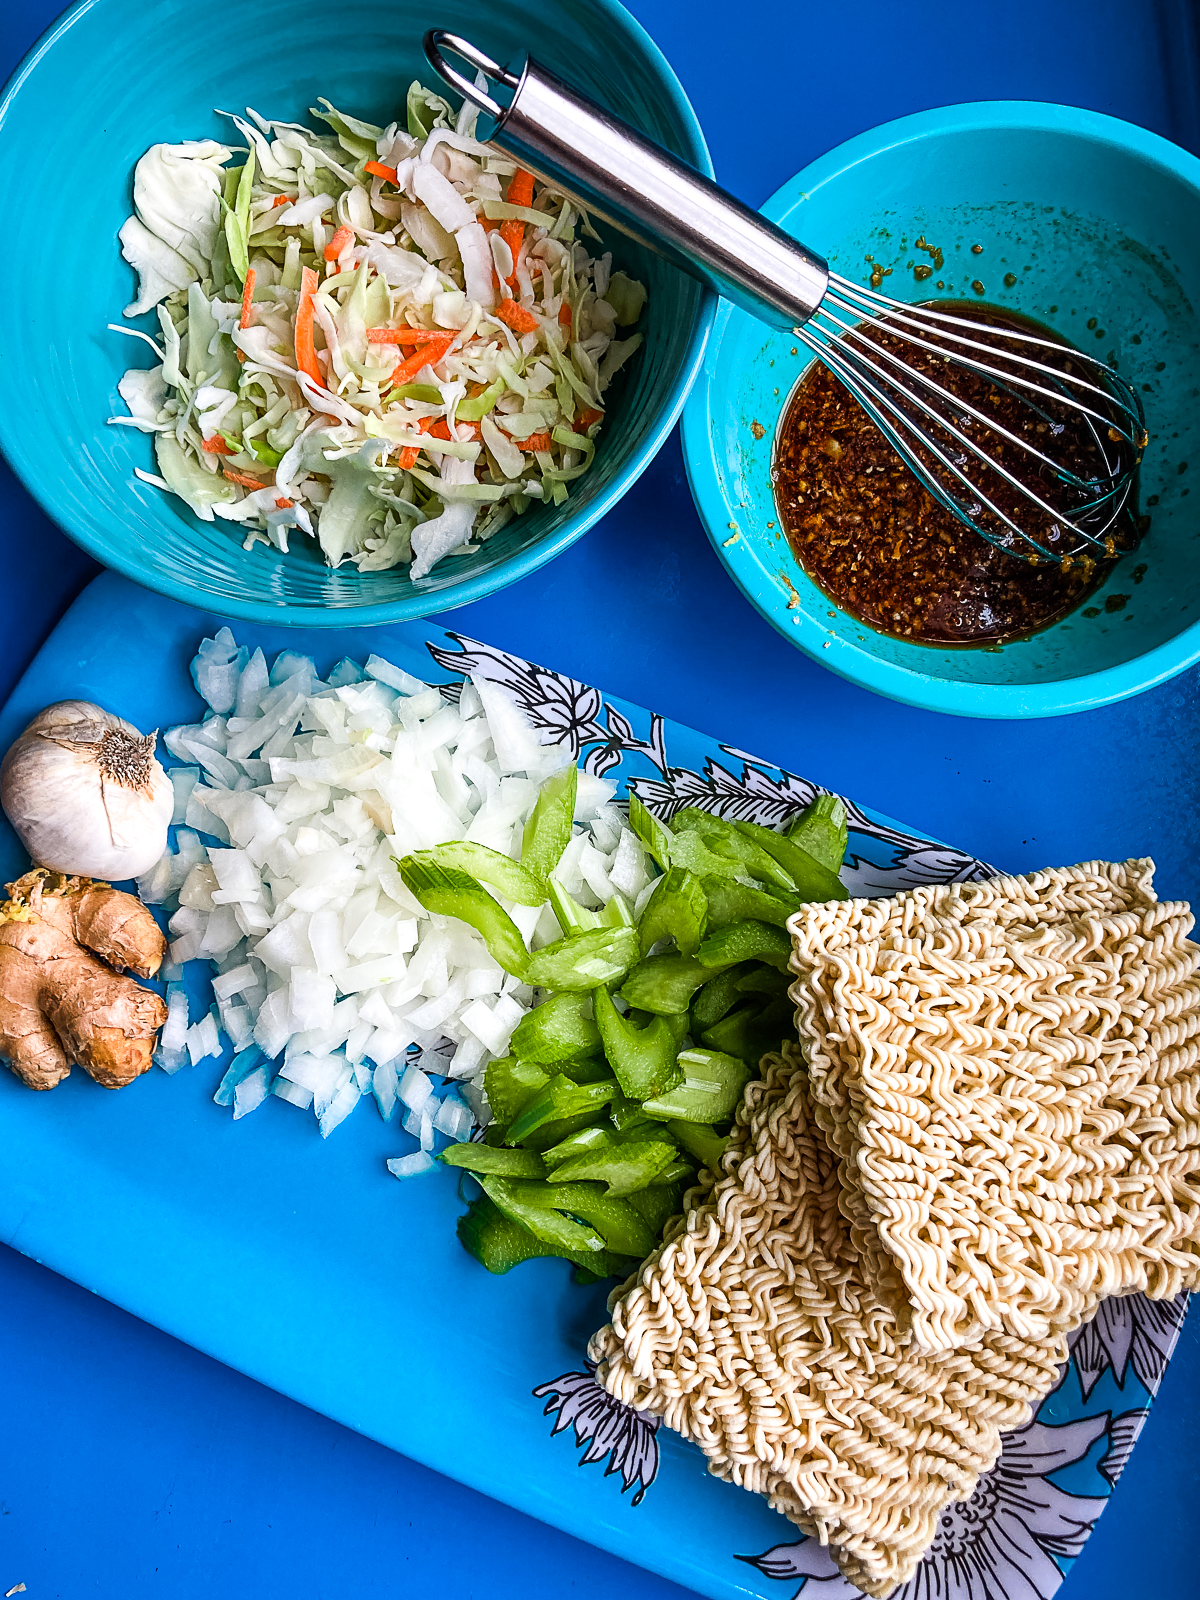 Ingredients for Chow Mein on a turquoise table